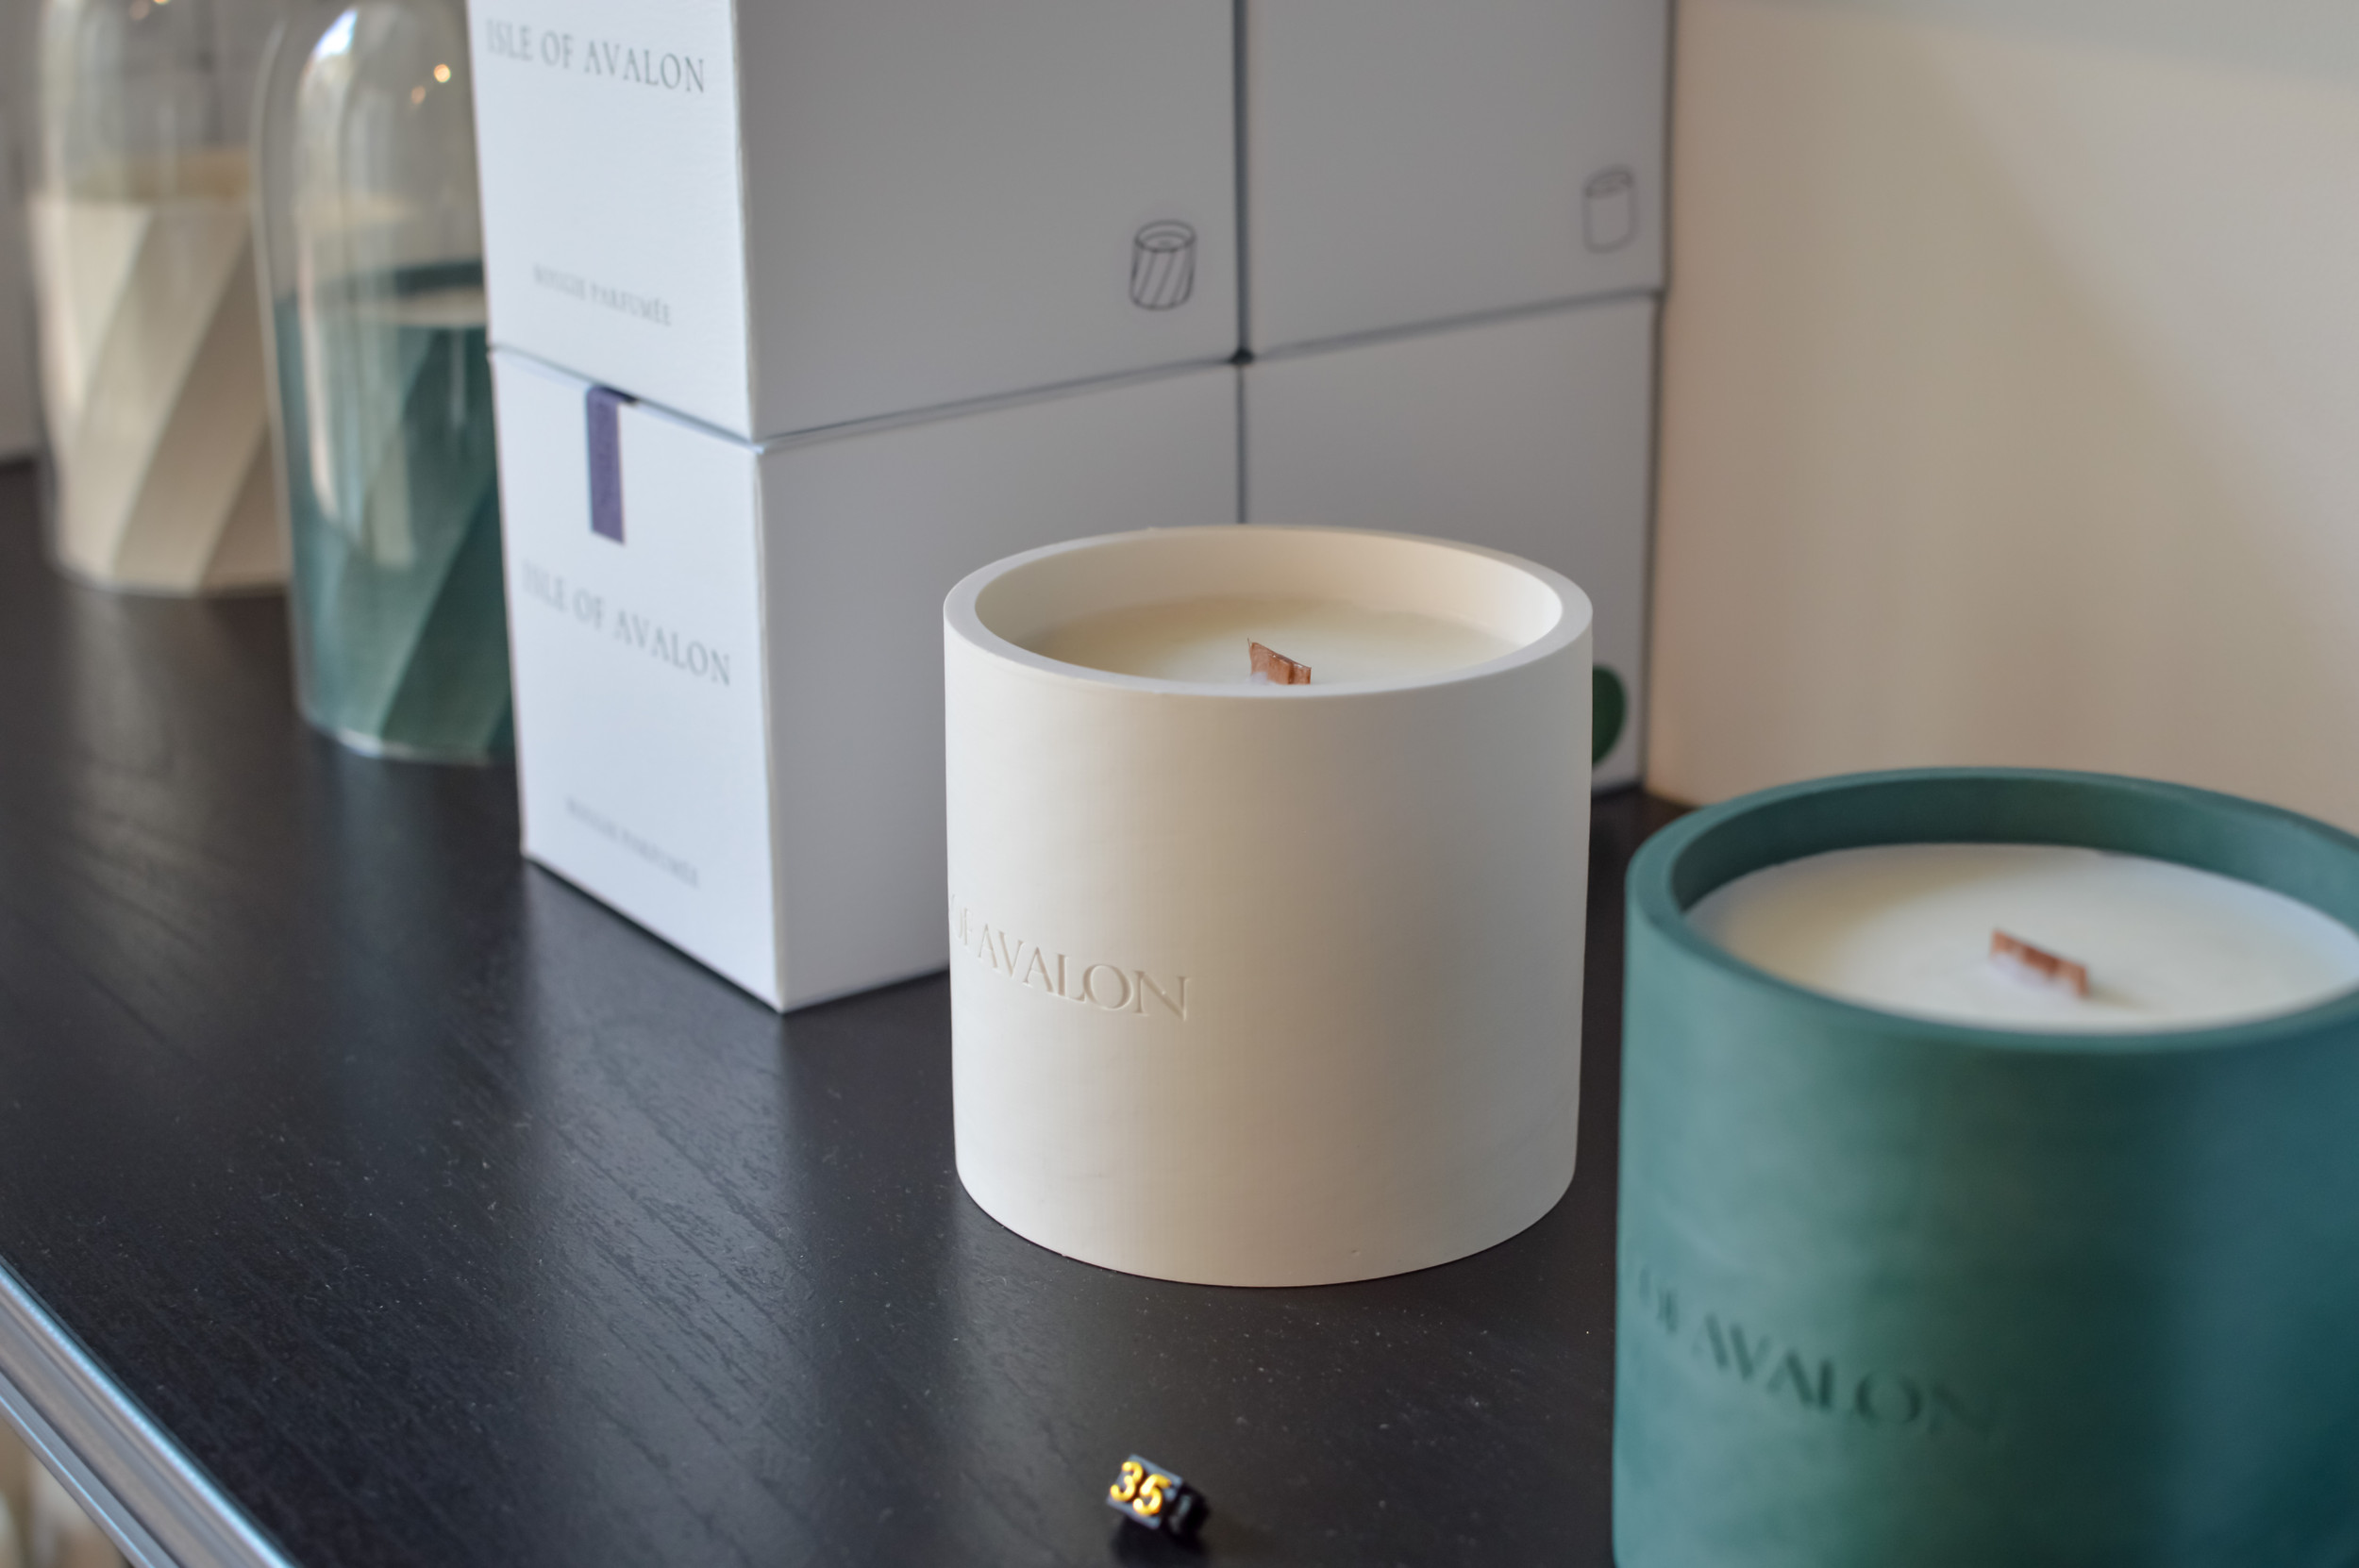 White and green candle on display at Isle of Avalon located in Dukes Lane in Brighton.